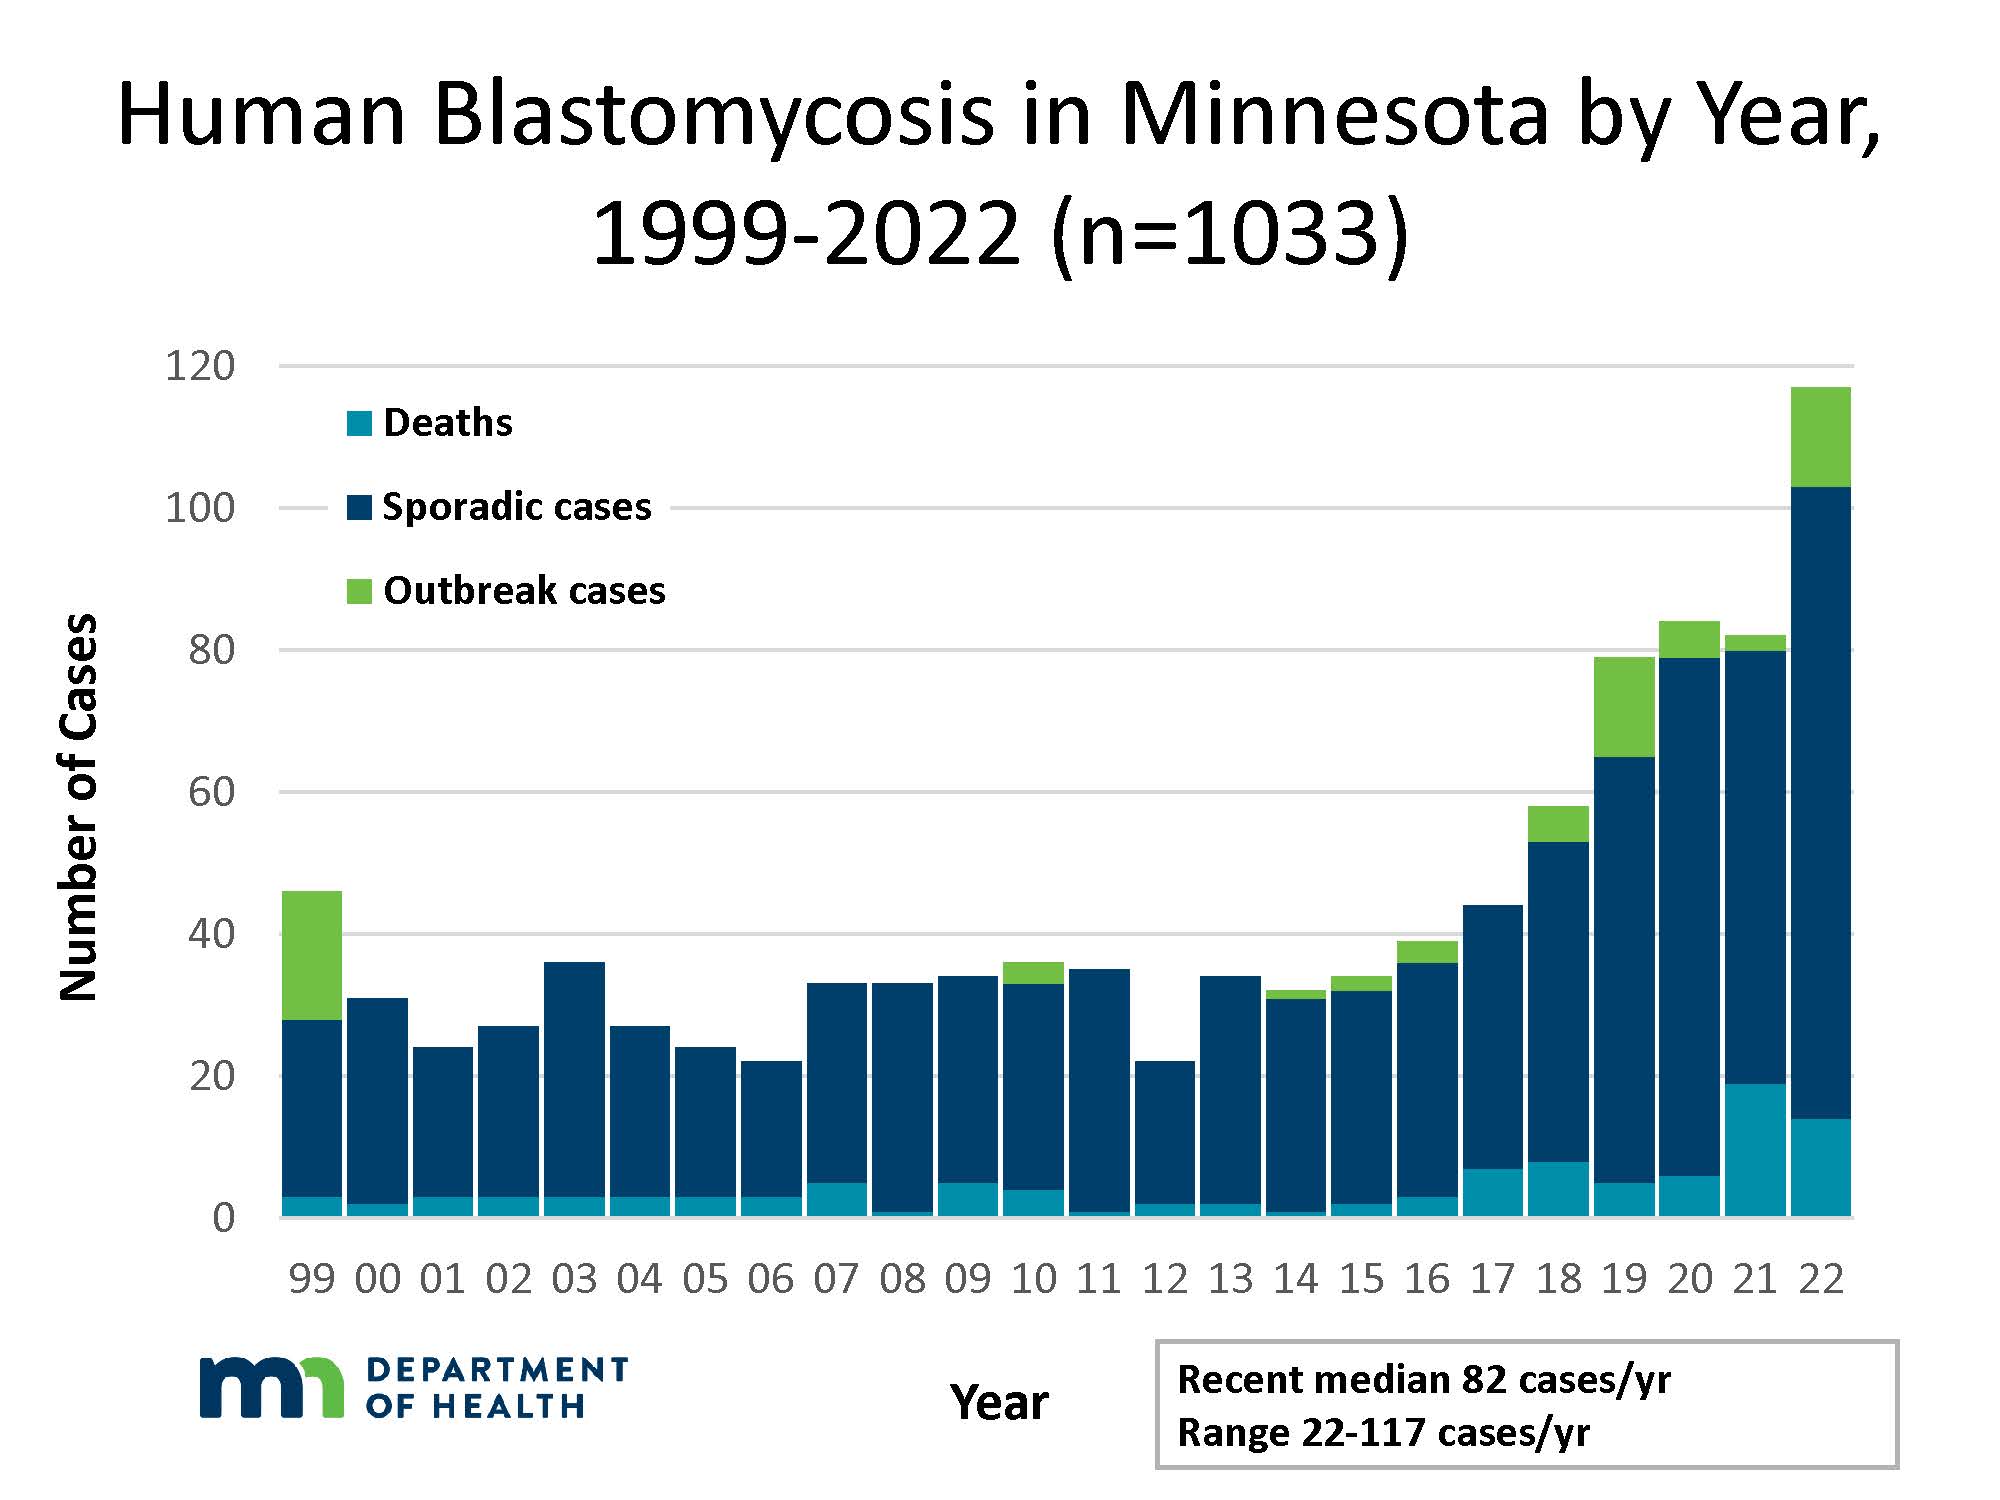 Human blastomycosis cases by year in MN